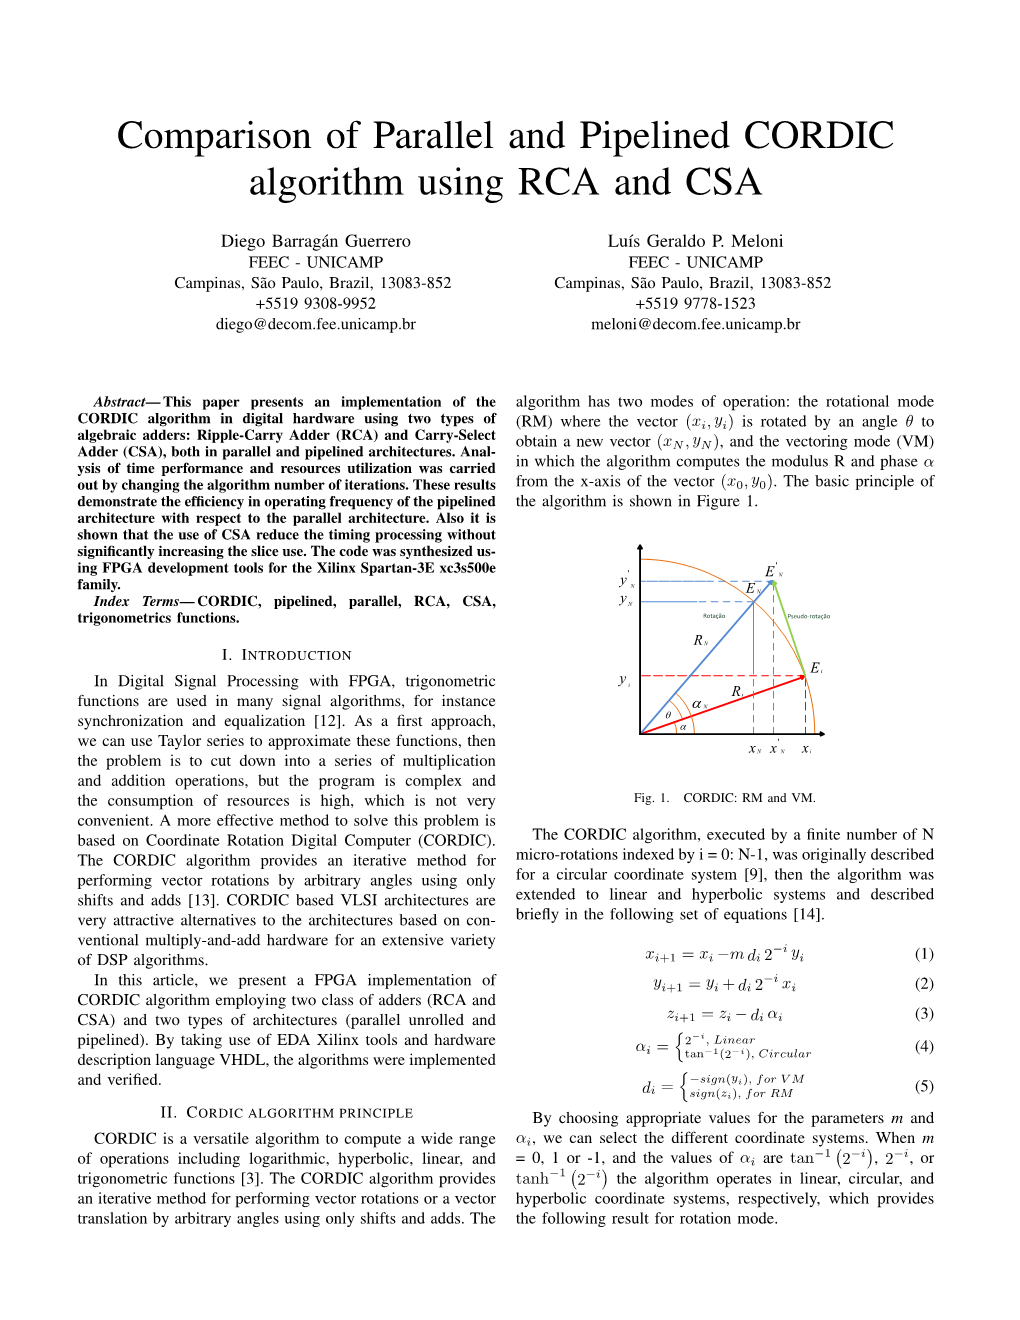 Comparison of Parallel and Pipelined CORDIC Algorithm Using RCA and CSA